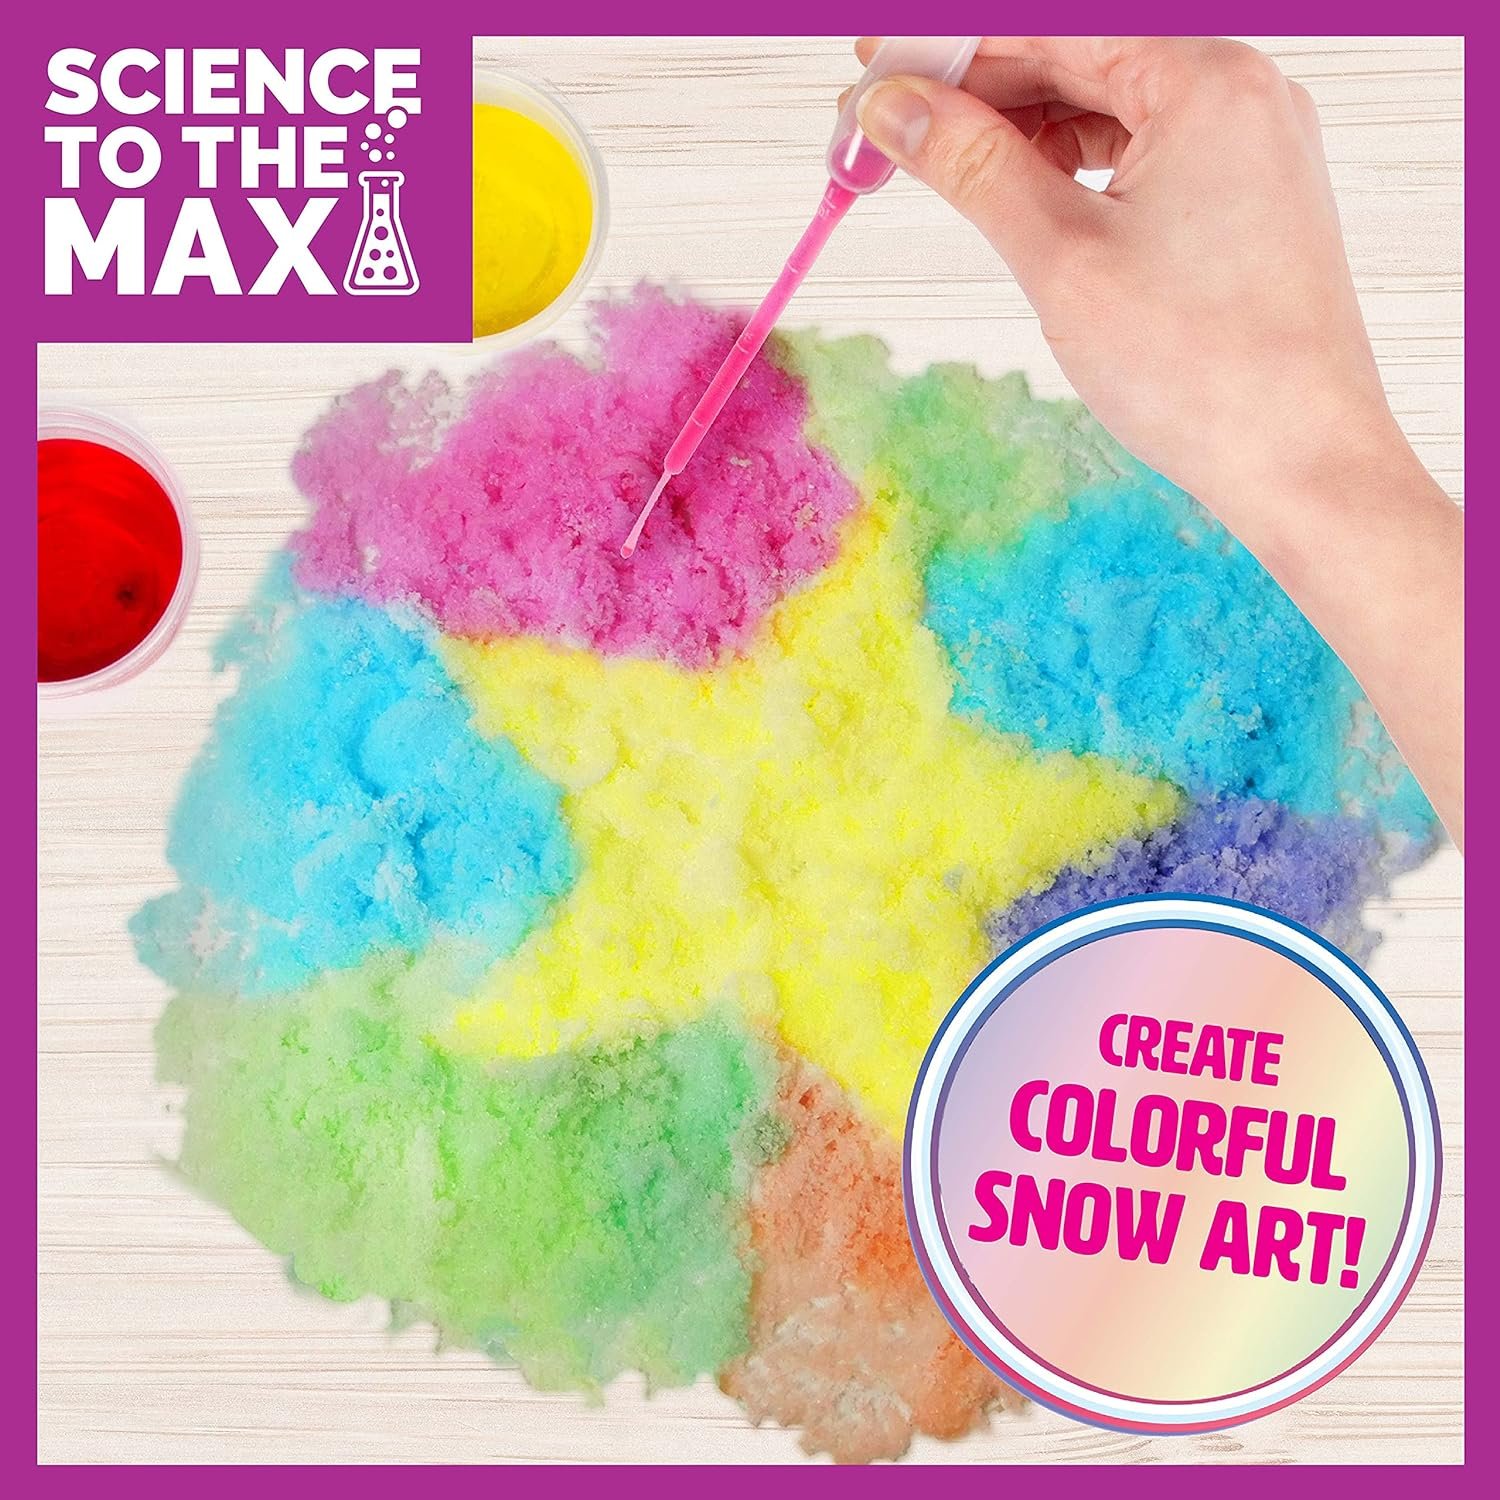 Science to The Max Rainbow Snow- Create 2 Gallon of Colorful and Reusable Snow- 7 Science Experiments Included - Stem Activity Kit for Boys & Girls 8+- Snow for Winter Display - image 5 of 10